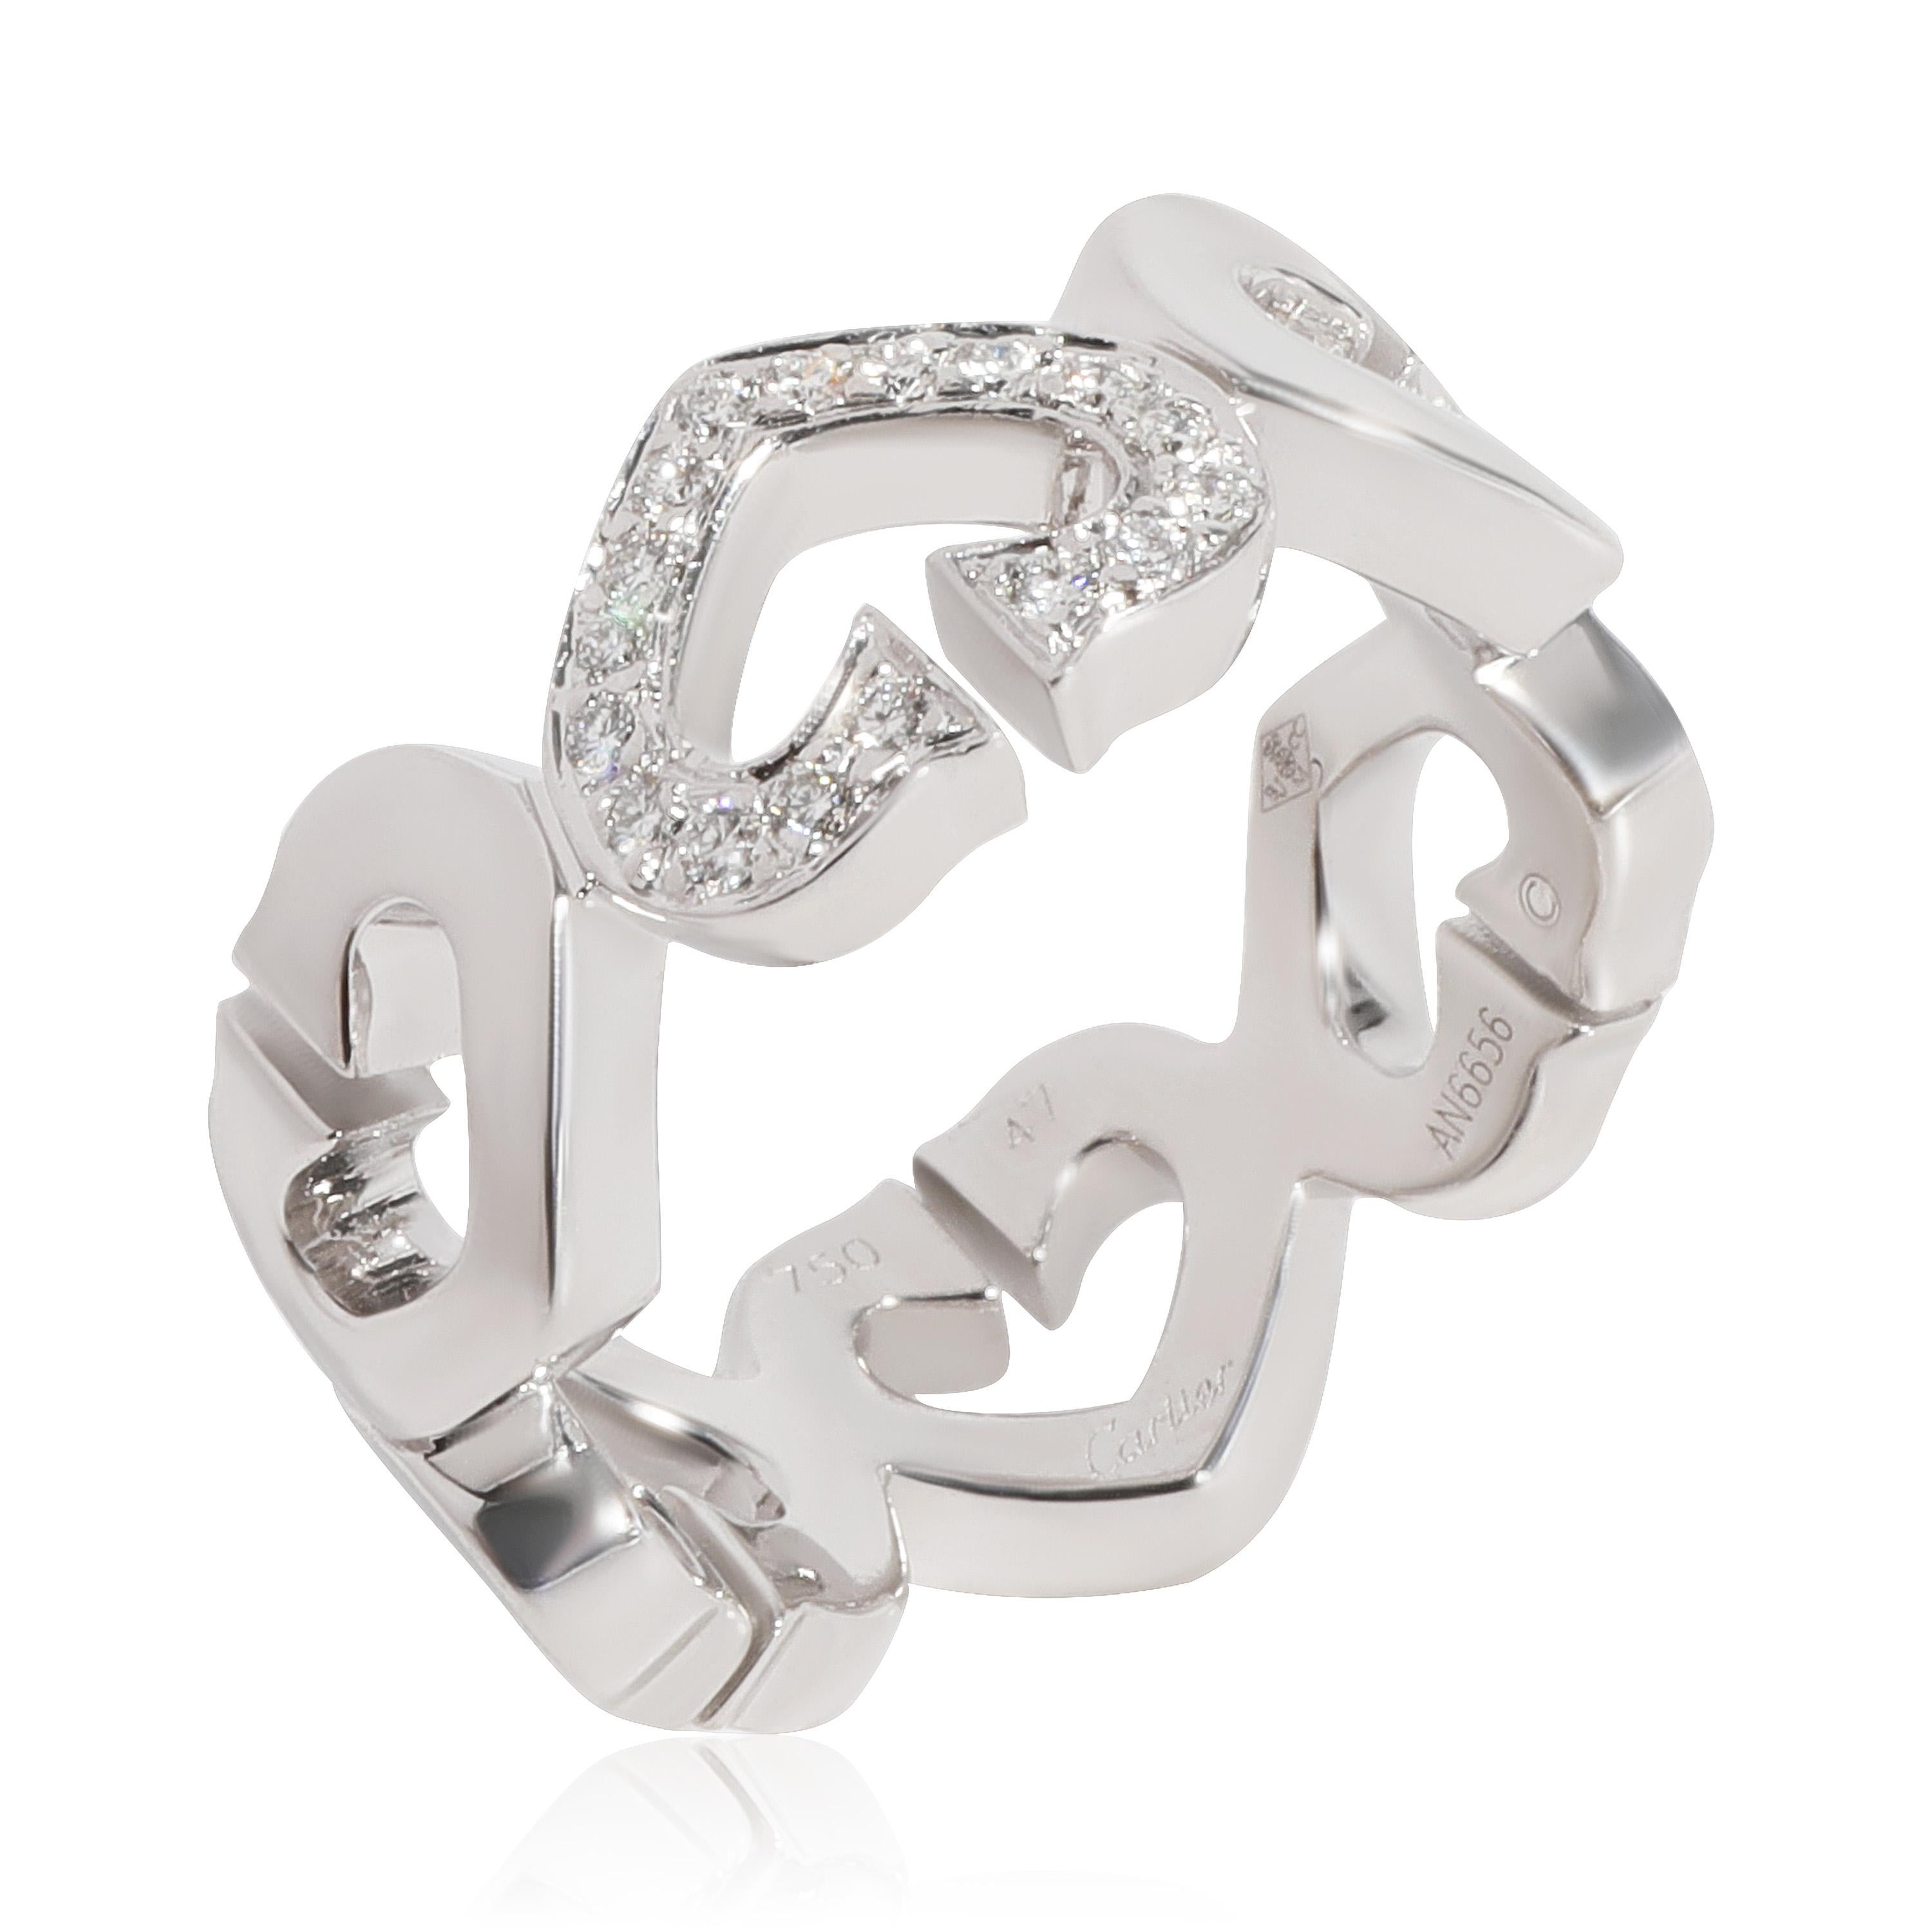 Cartier C Heart of Cartier Diamond Ring in 18K  White Gold 0.13 CTW

PRIMARY DETAILS
SKU: 117176
Listing Title: Cartier C Heart of Cartier Diamond Ring in 18K  White Gold 0.13 CTW
Condition Description: Retails for 4550 USD. In excellent condition